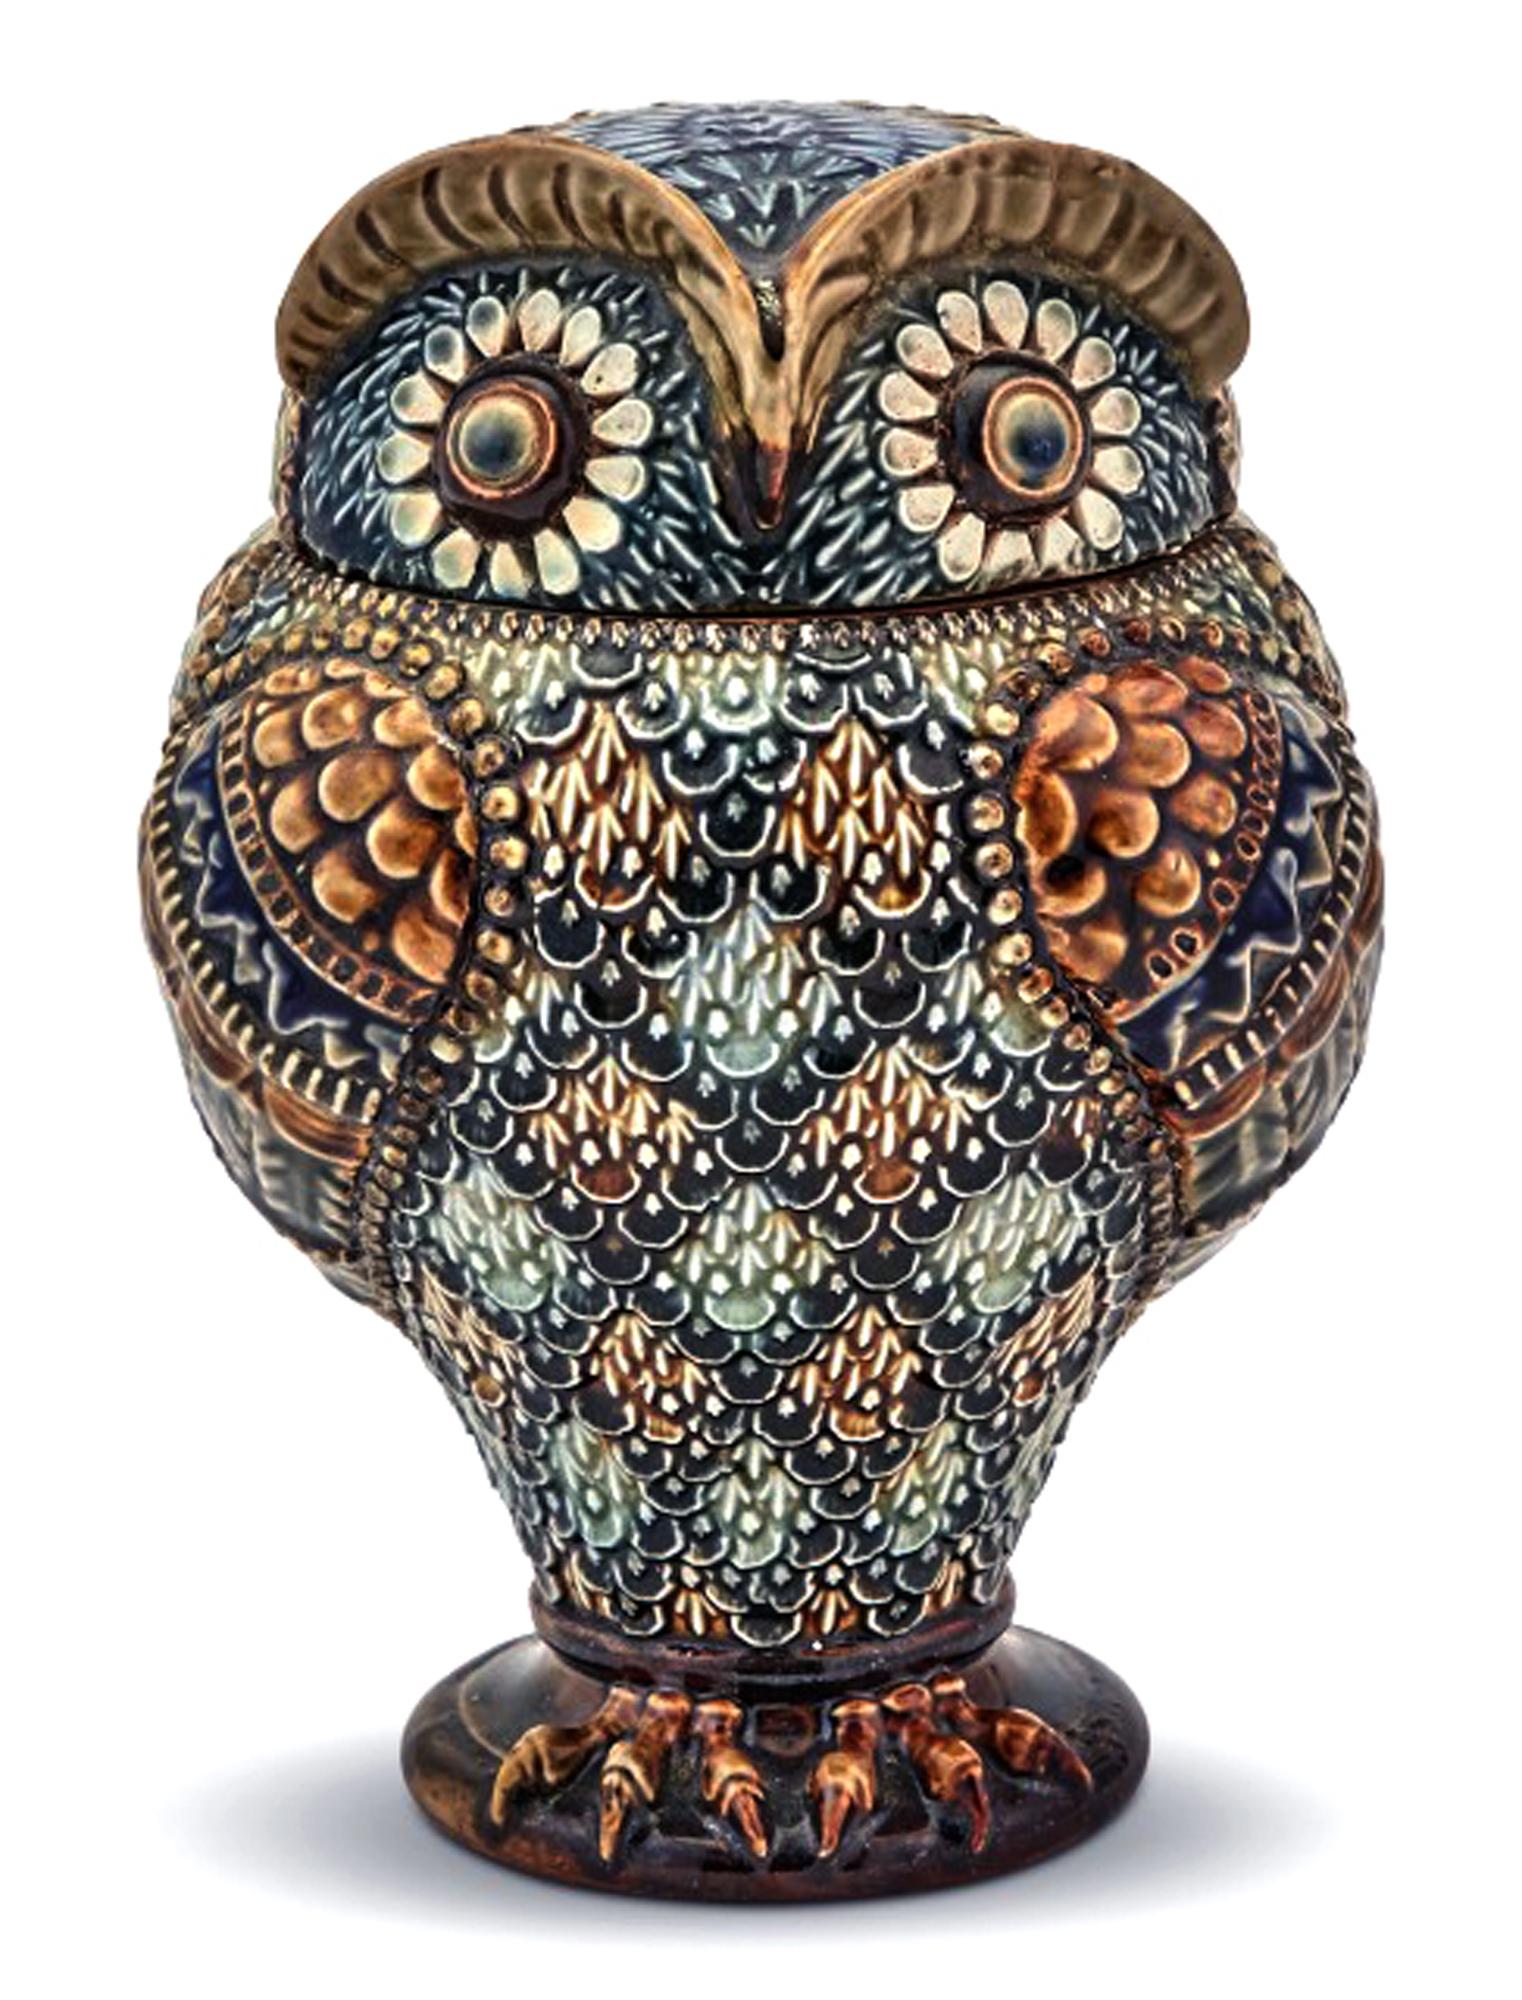 Doulton stoneware jar and cover in form of an owl,
Marked for Mark V. Marshall,
Dated 1883.

A striking tobacco jar and cover in the form of an owl with diamond pattern designs acoss the body and eyes like daisy's.

Dimensions: 7 1/2 inches